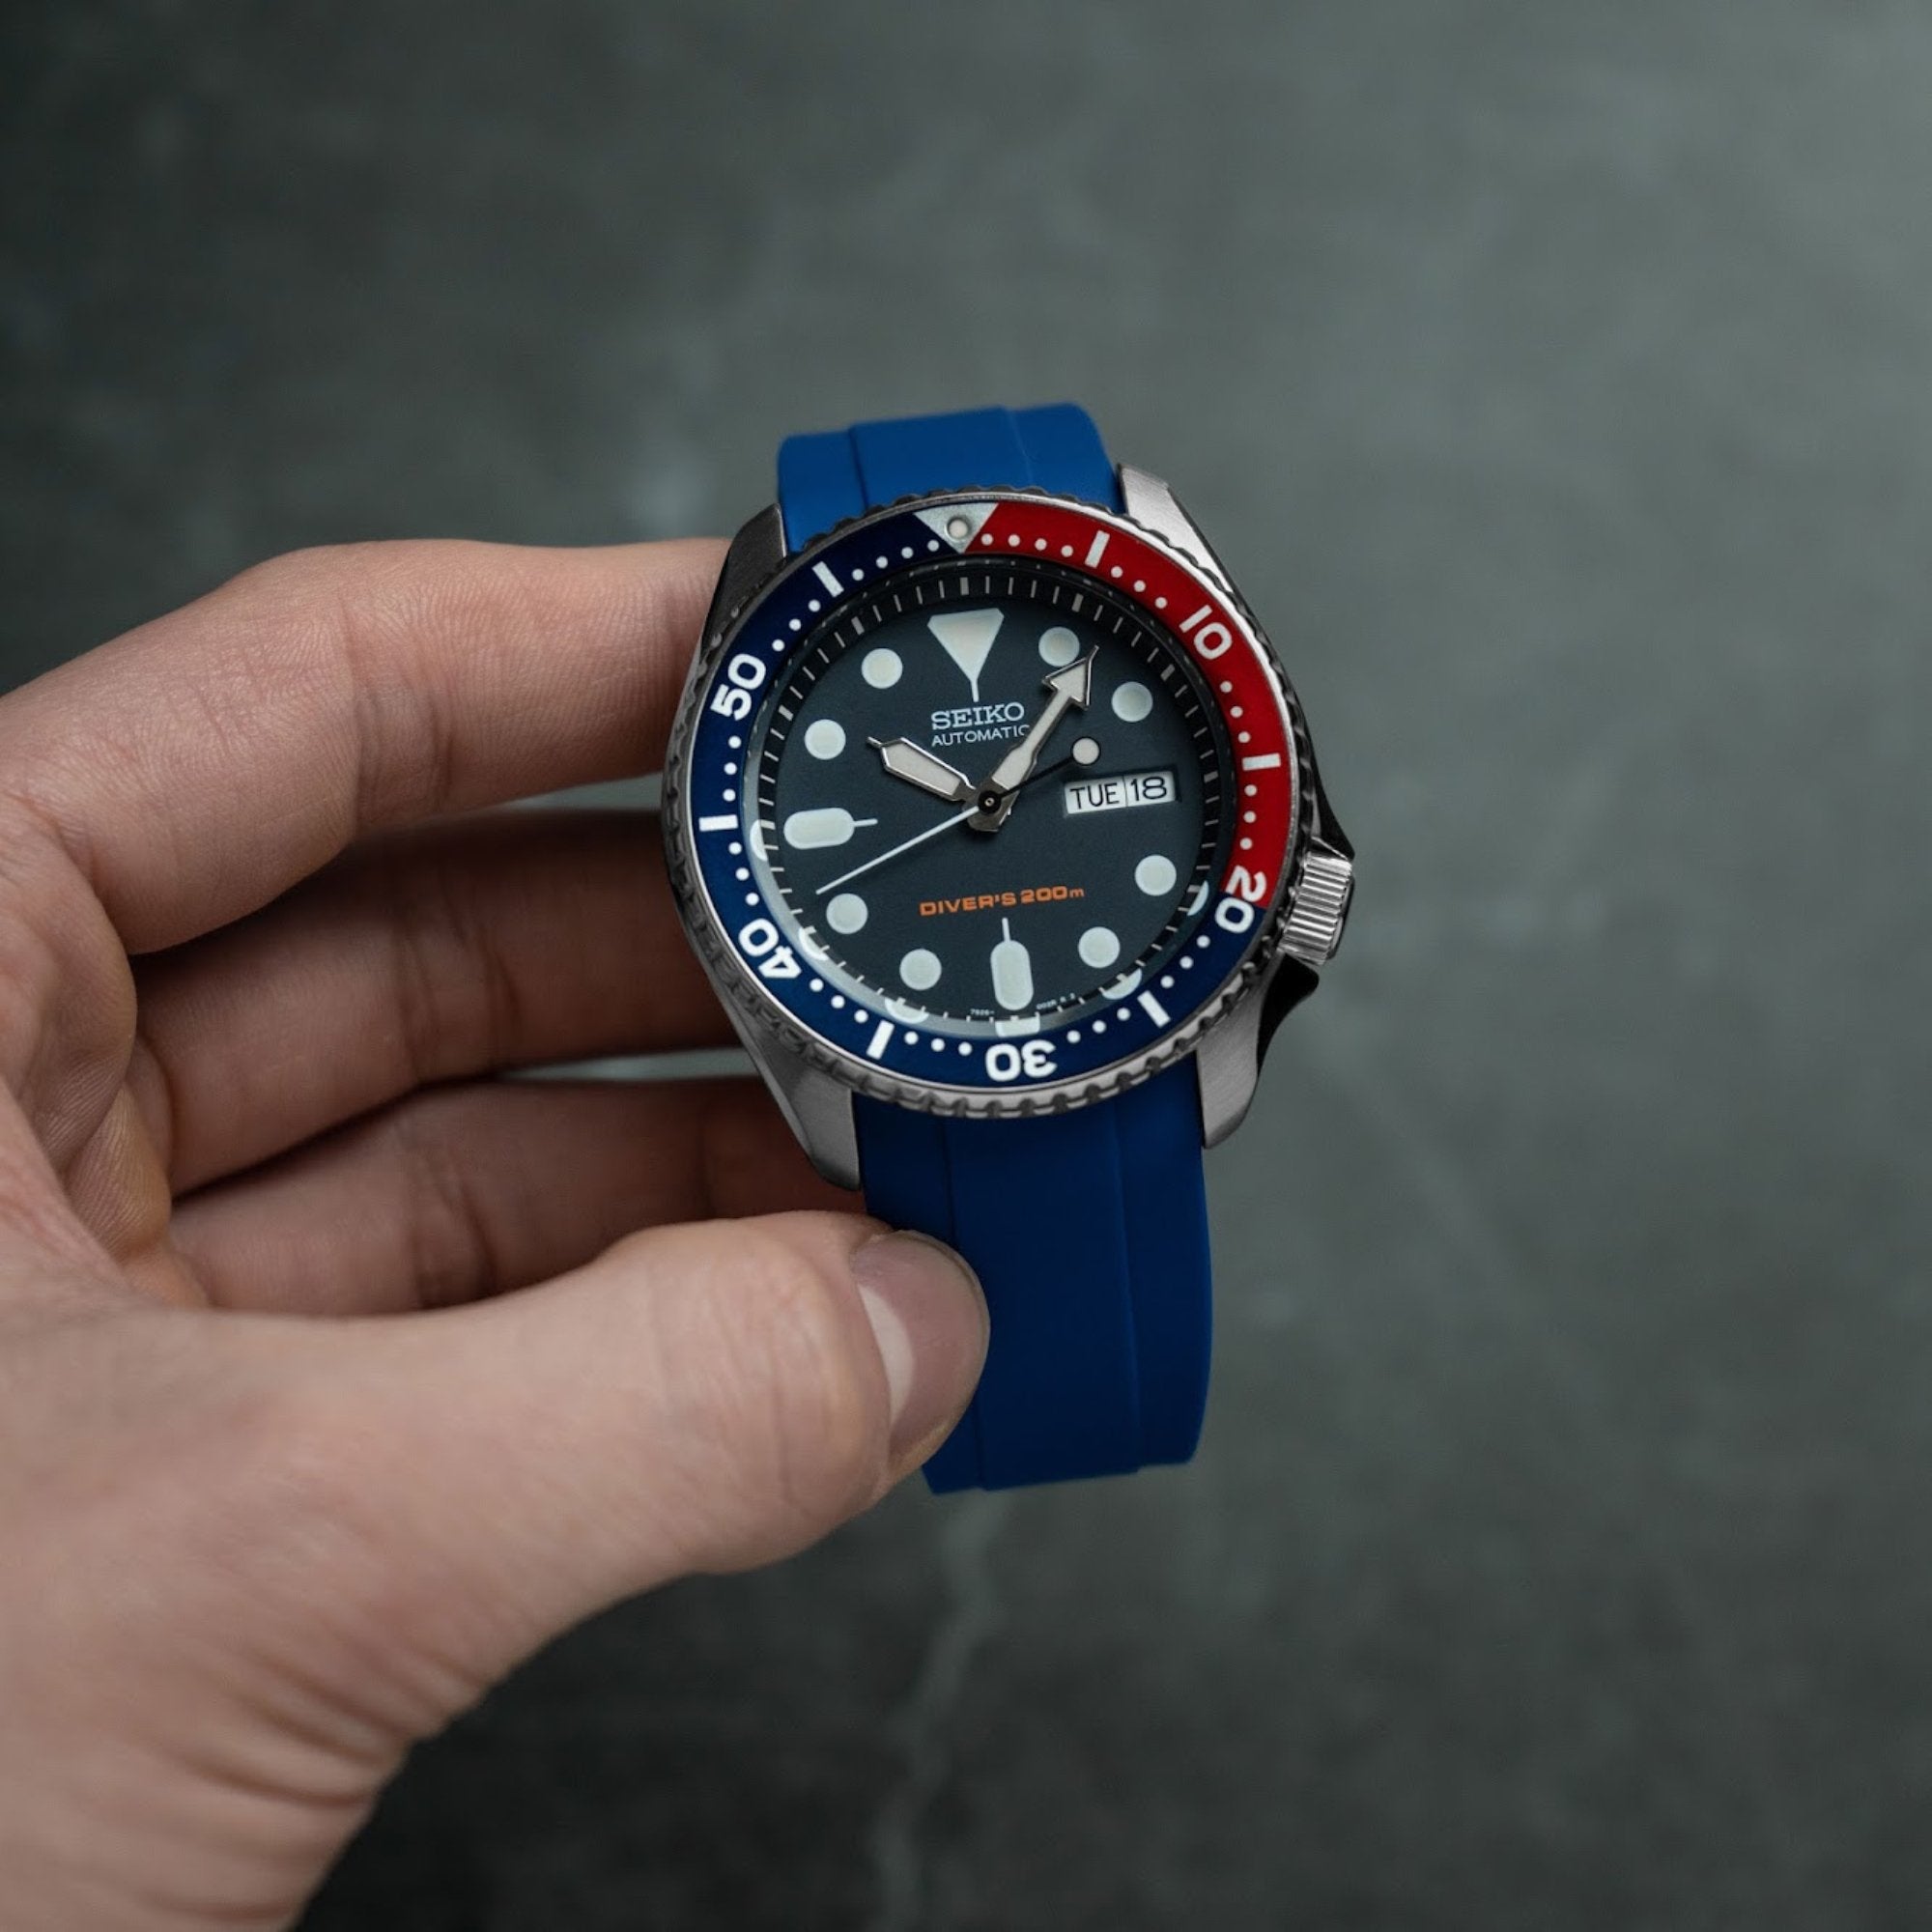 Curved End Soft Silicone Strap - Compatible with Omega Seamaster - Royal Blue (2418) -StrapSeeker